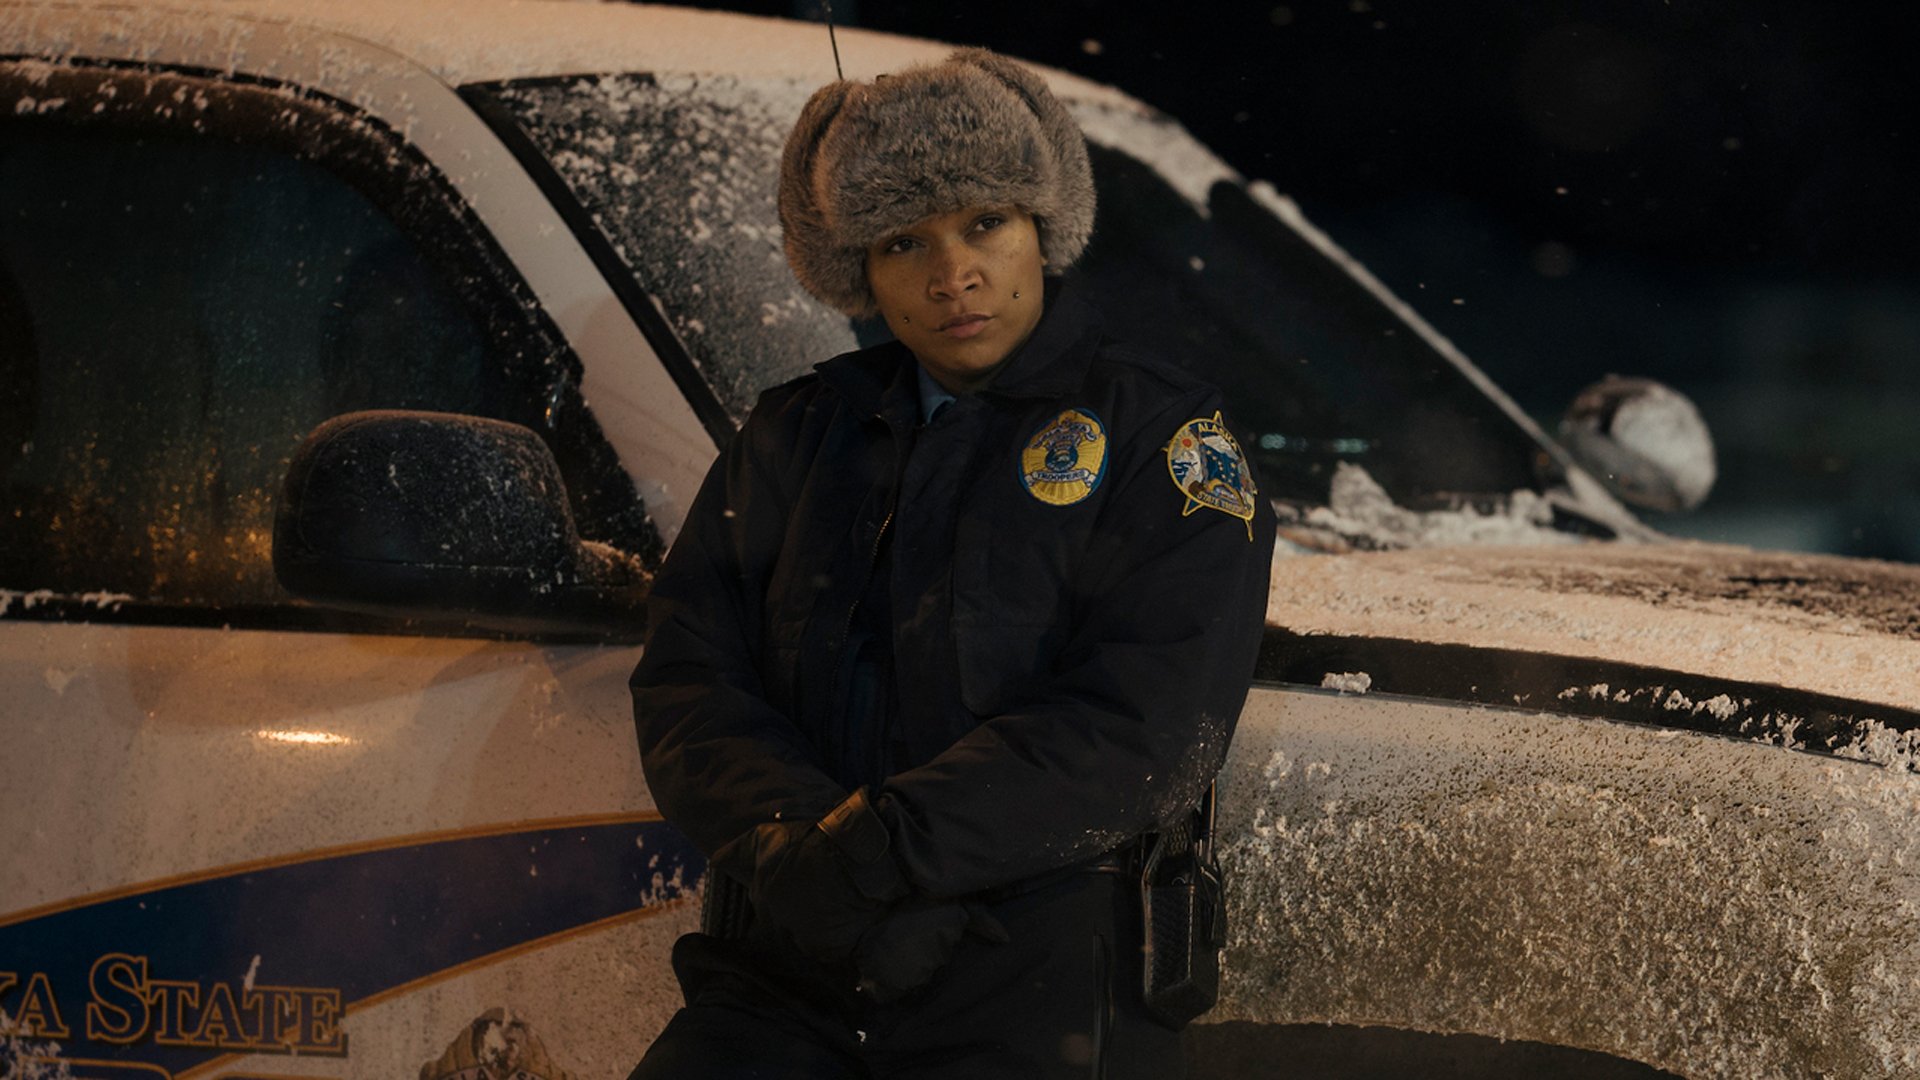 A detective leans on her car in the snow.